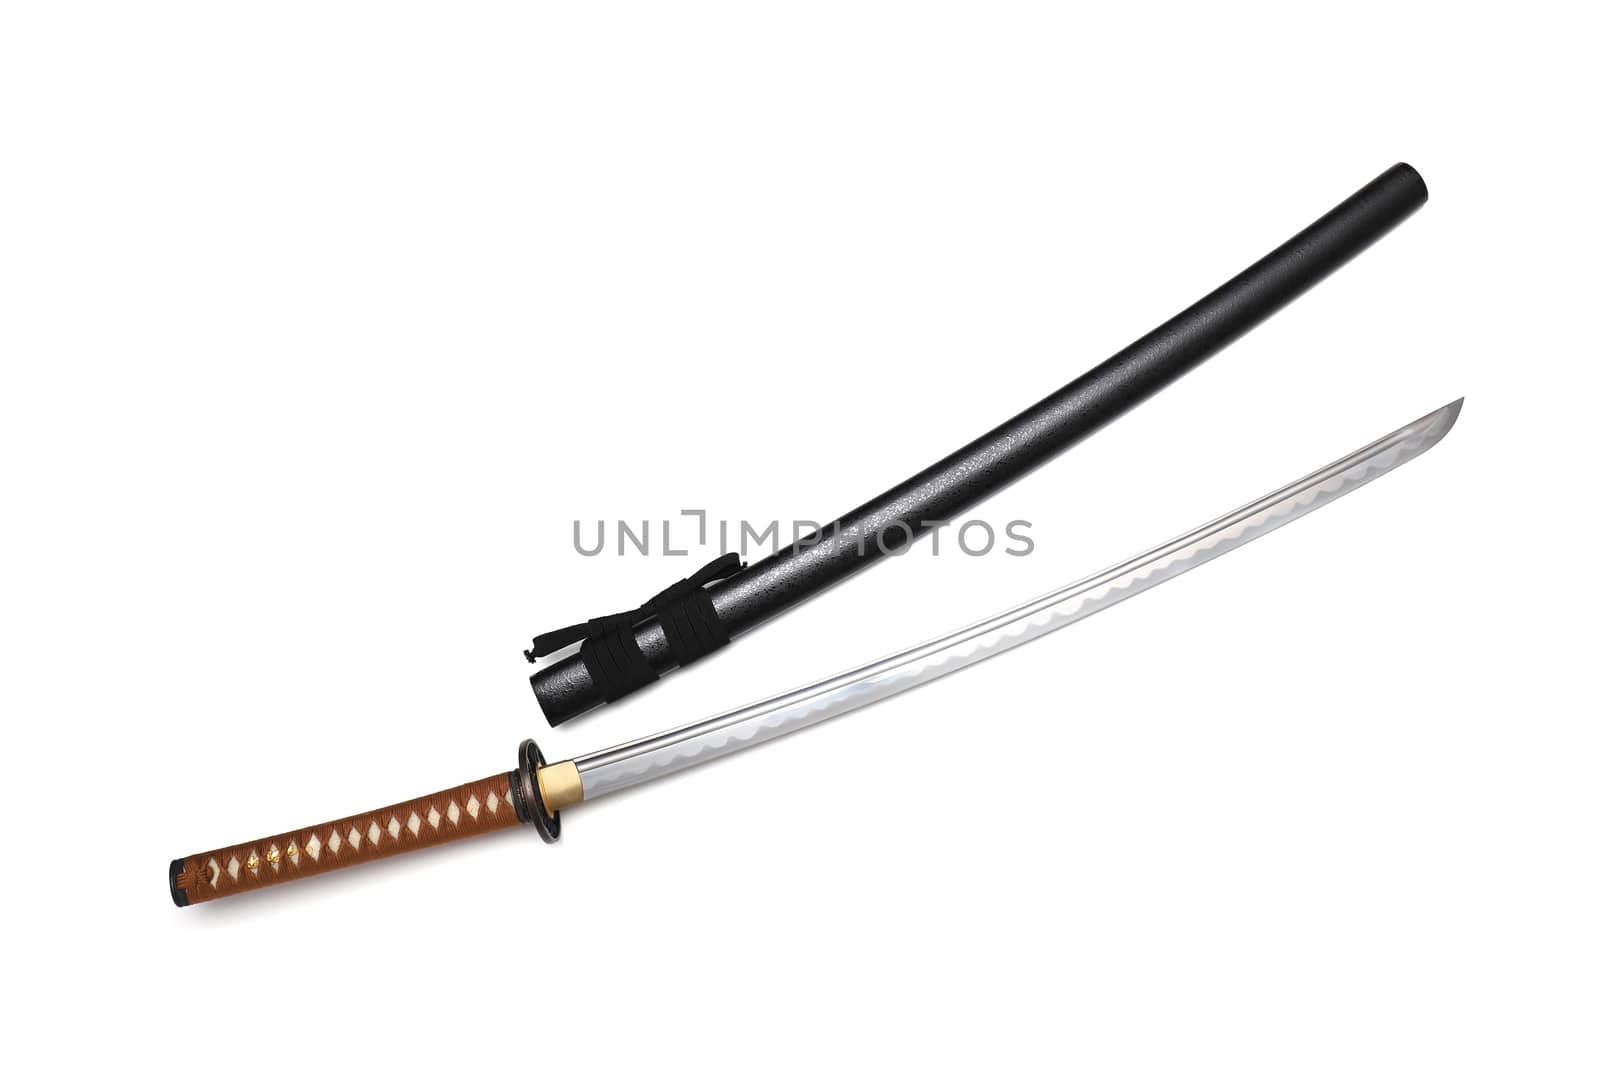 Japanese sword steel fitting and brown cord with black scabbard isolated in white background. Selective focus.